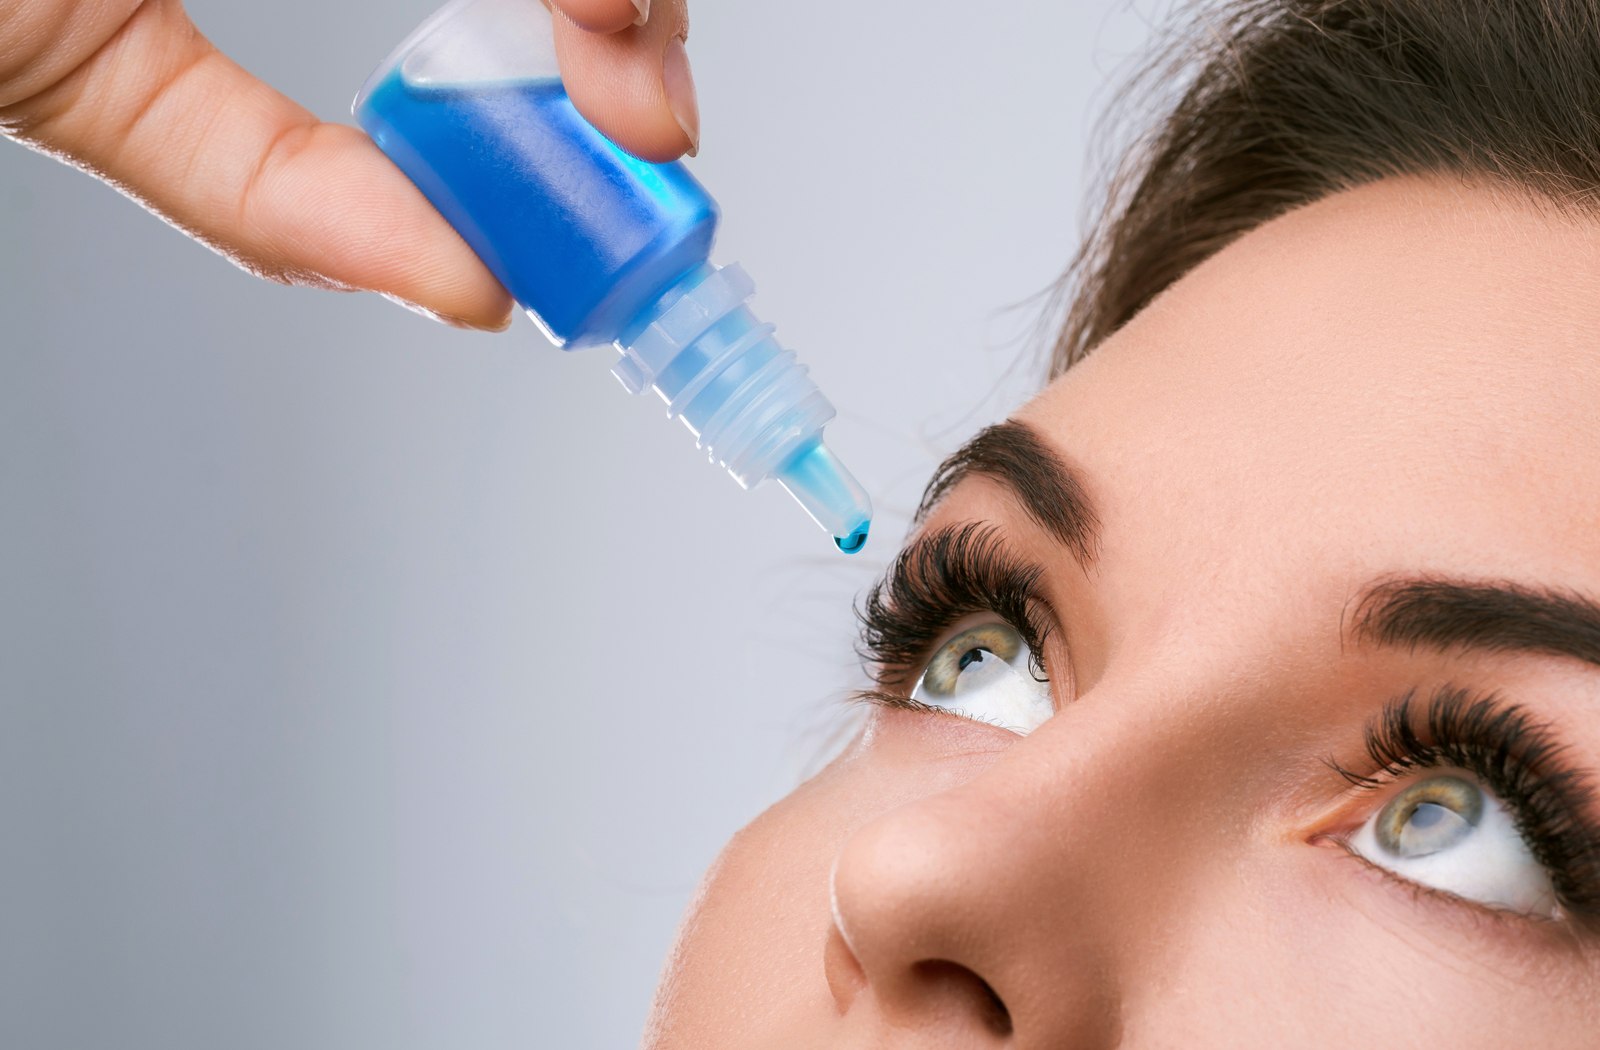 Administering blue eye drops to a lady with green eyes to relieve her symptoms of dry eye